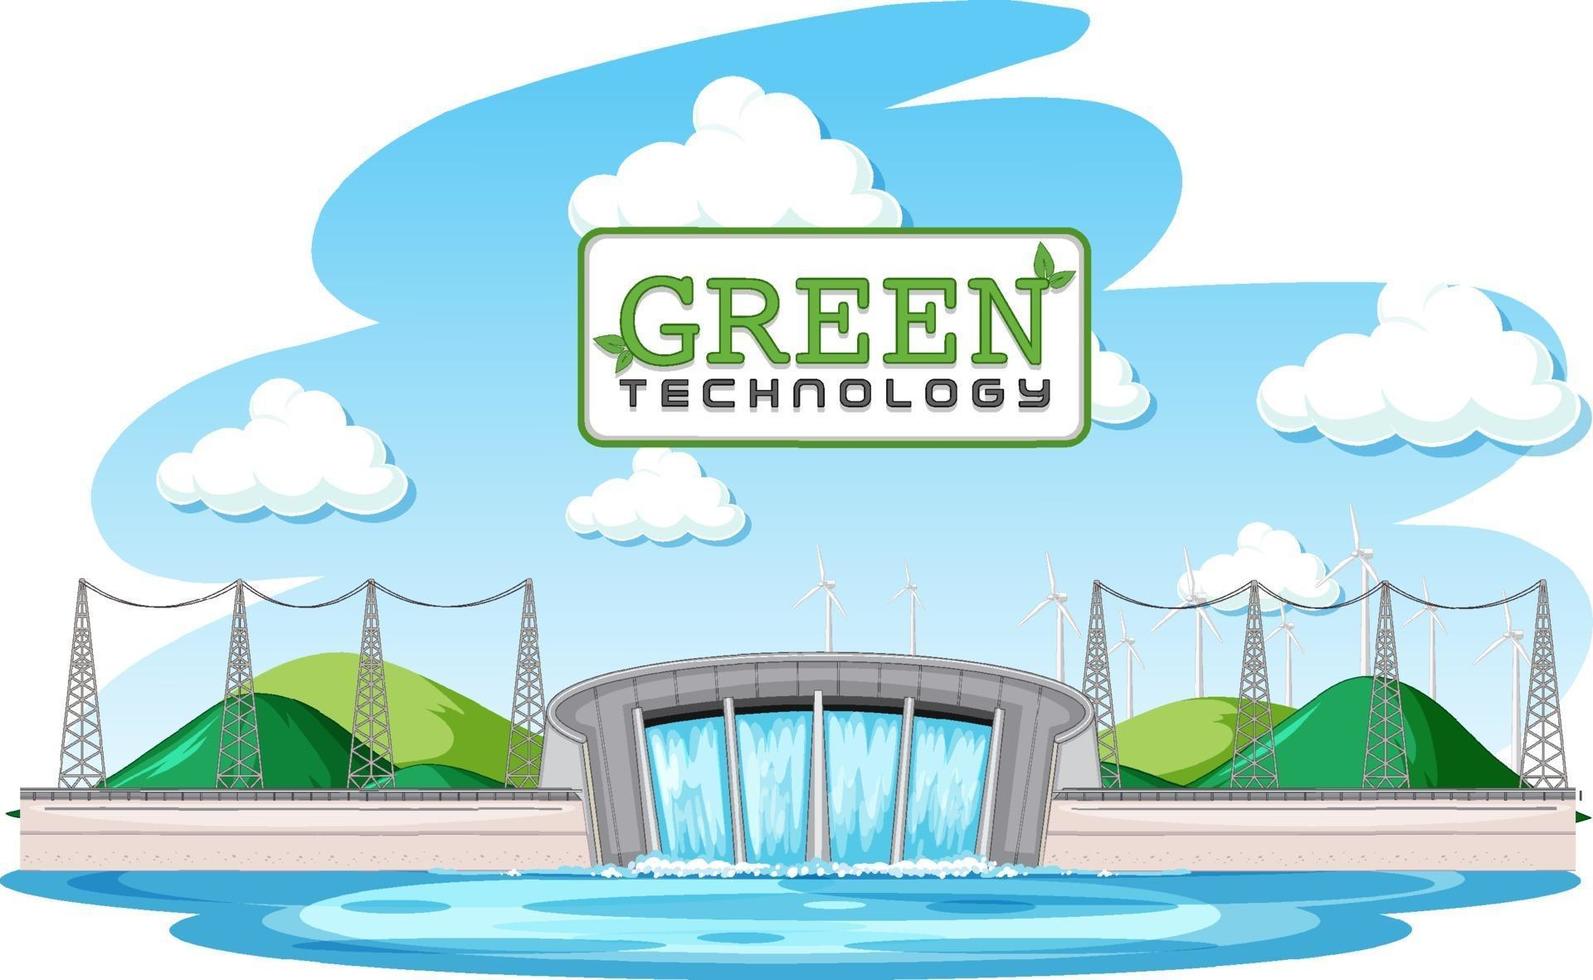 Hydro Power Plants generate electricity with green banner vector